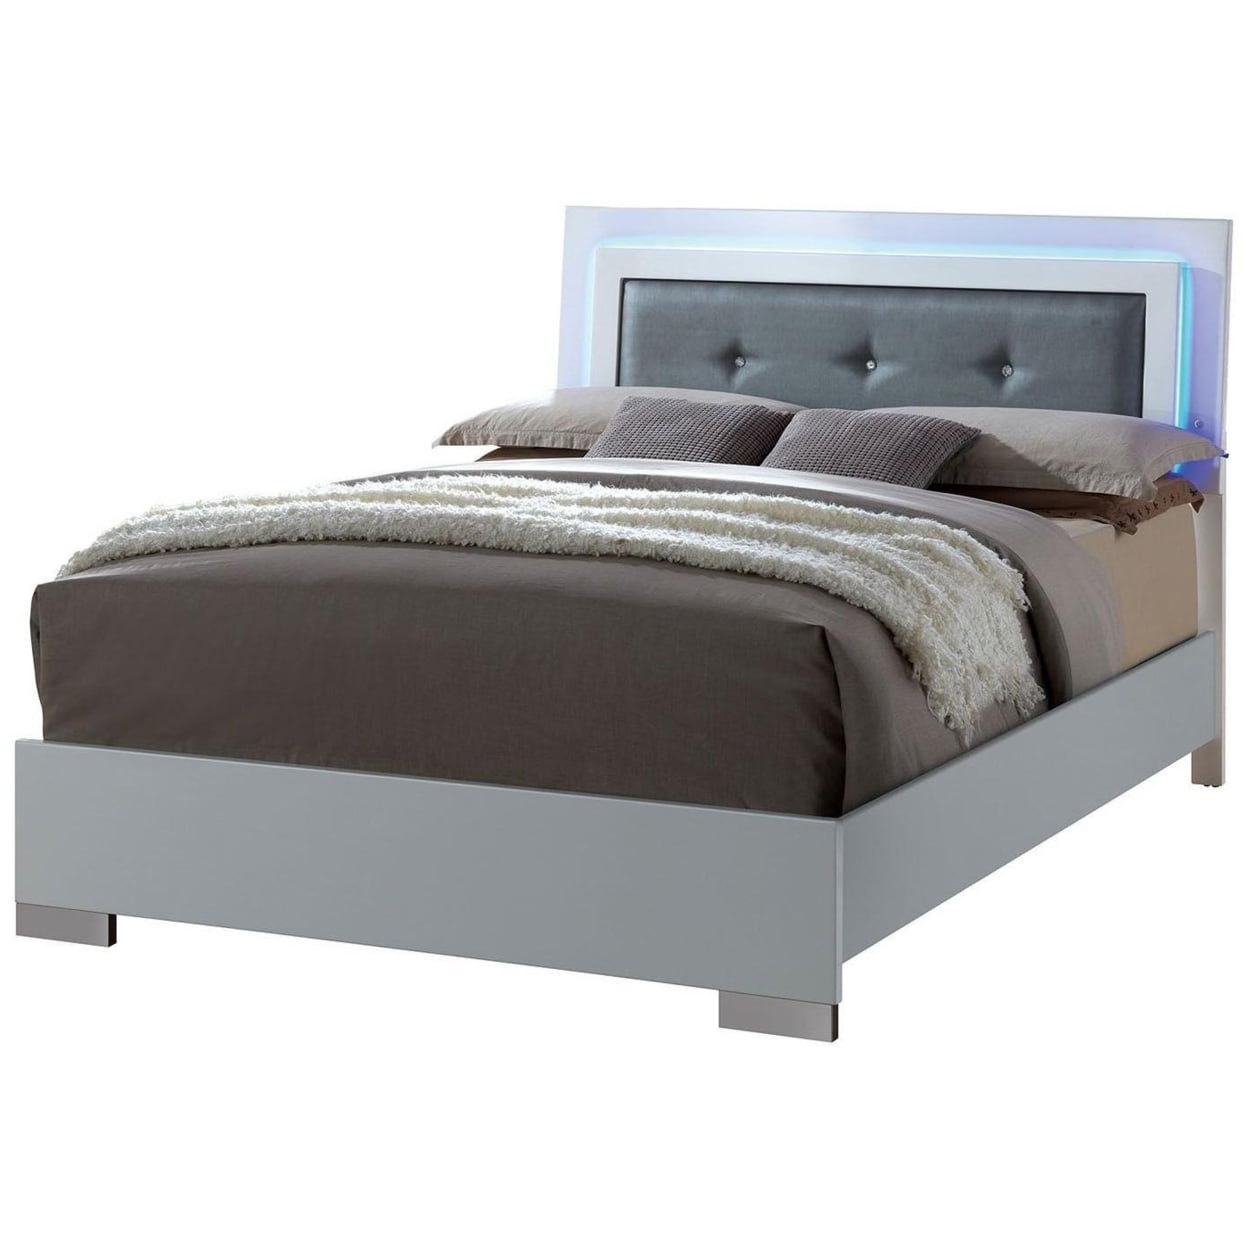 BM216279 Wooden Queen Size Bed with Leatherette Headboard & LED trim - White - 48.625 x 63.375 x 84.125 in -  Benjara